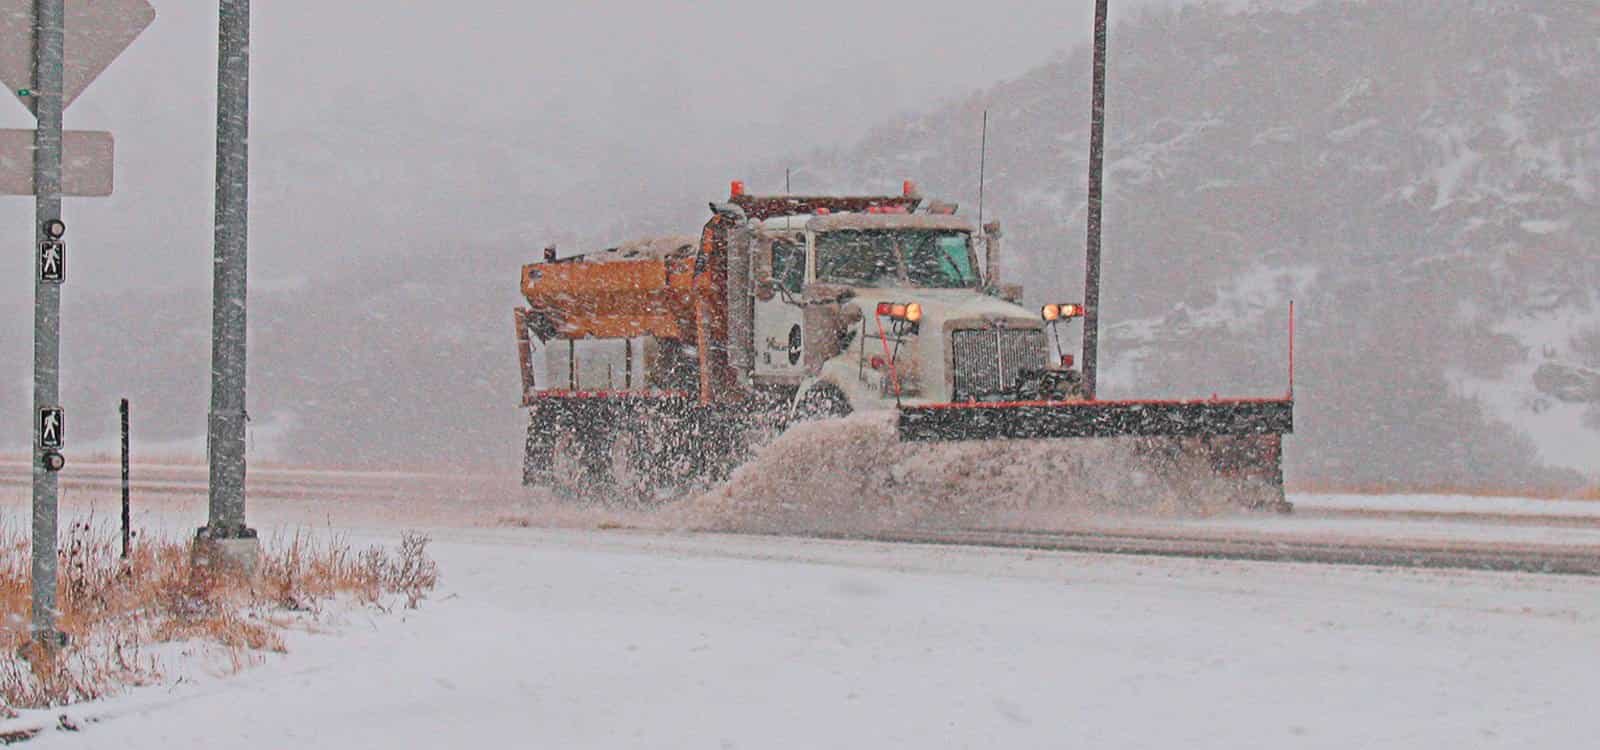 Douglas County snow plow in with blade on roadway during snow storm